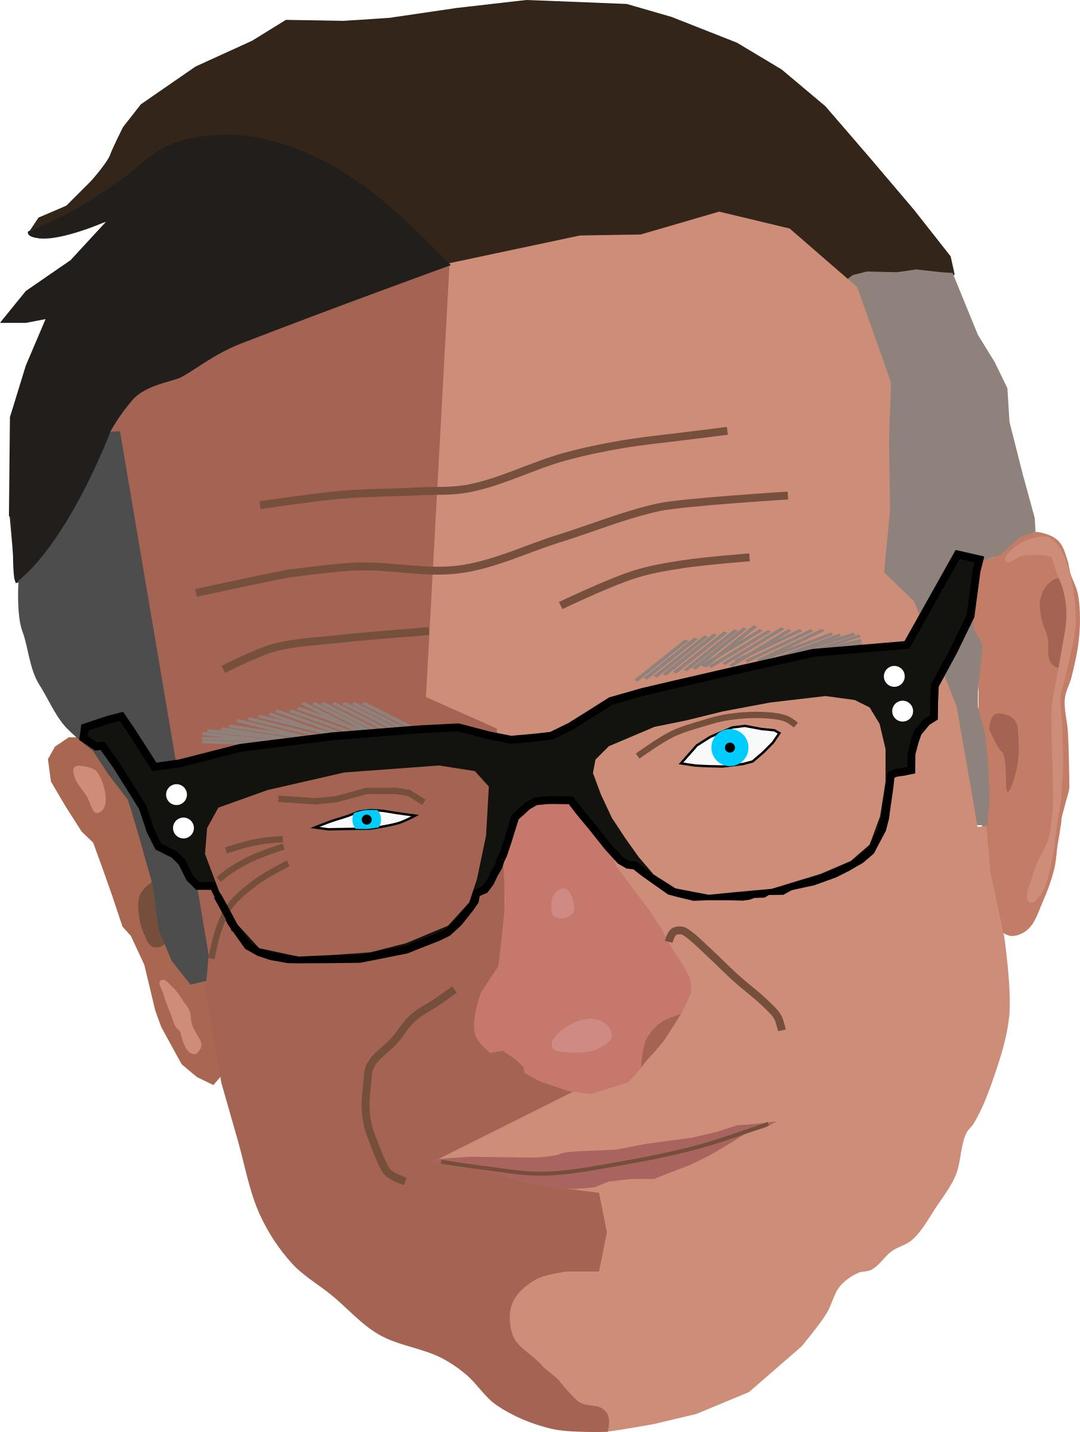 Robin Williams - Famous Person png transparent